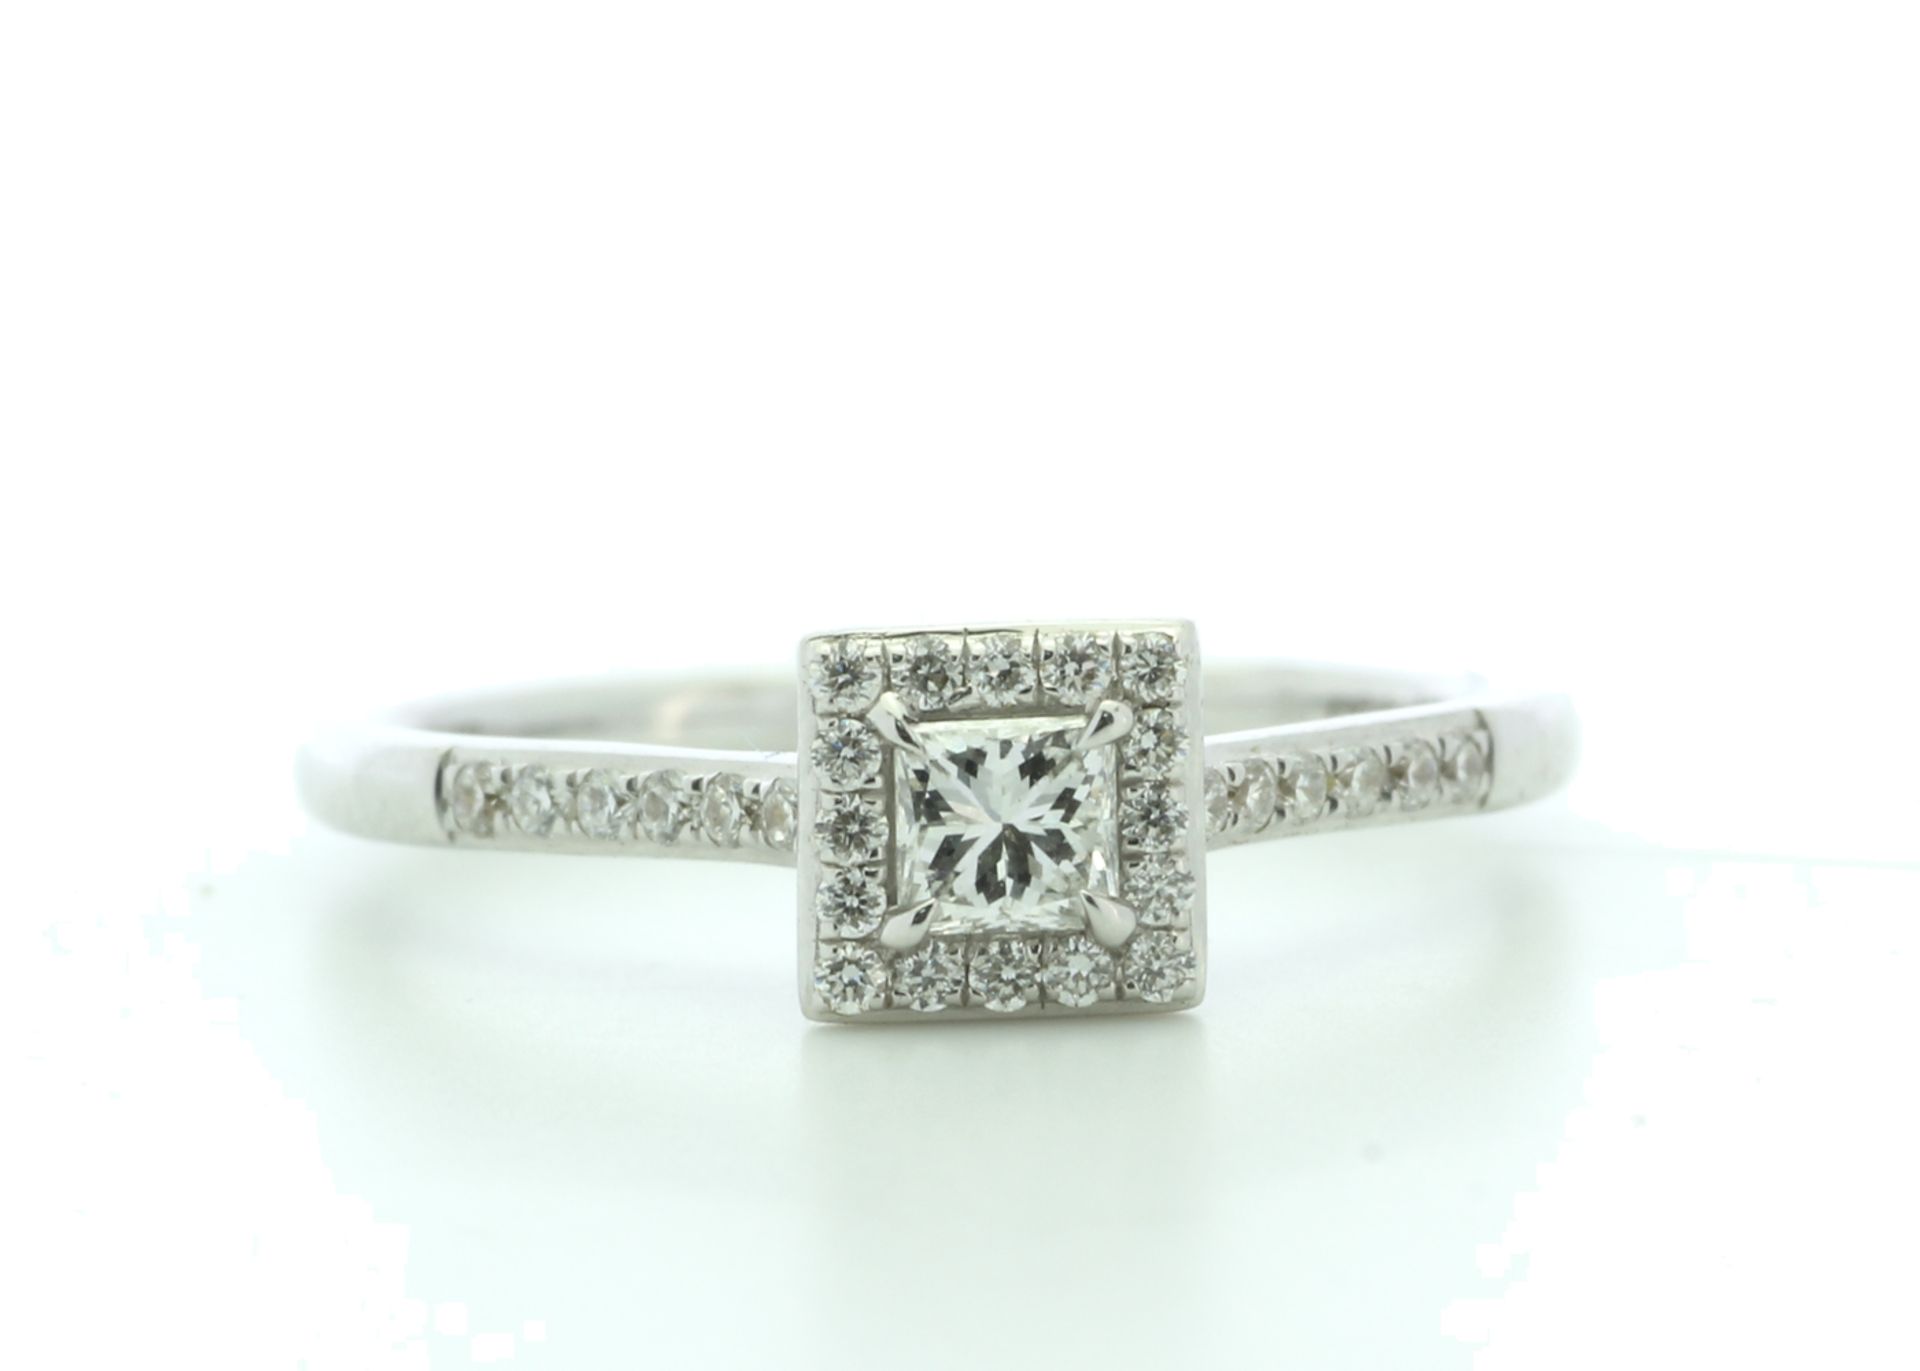 18ct White Gold Halo Set Diamond Ring 0.38 Carats - Valued by IDI £3,950.00 - A sparkling natural